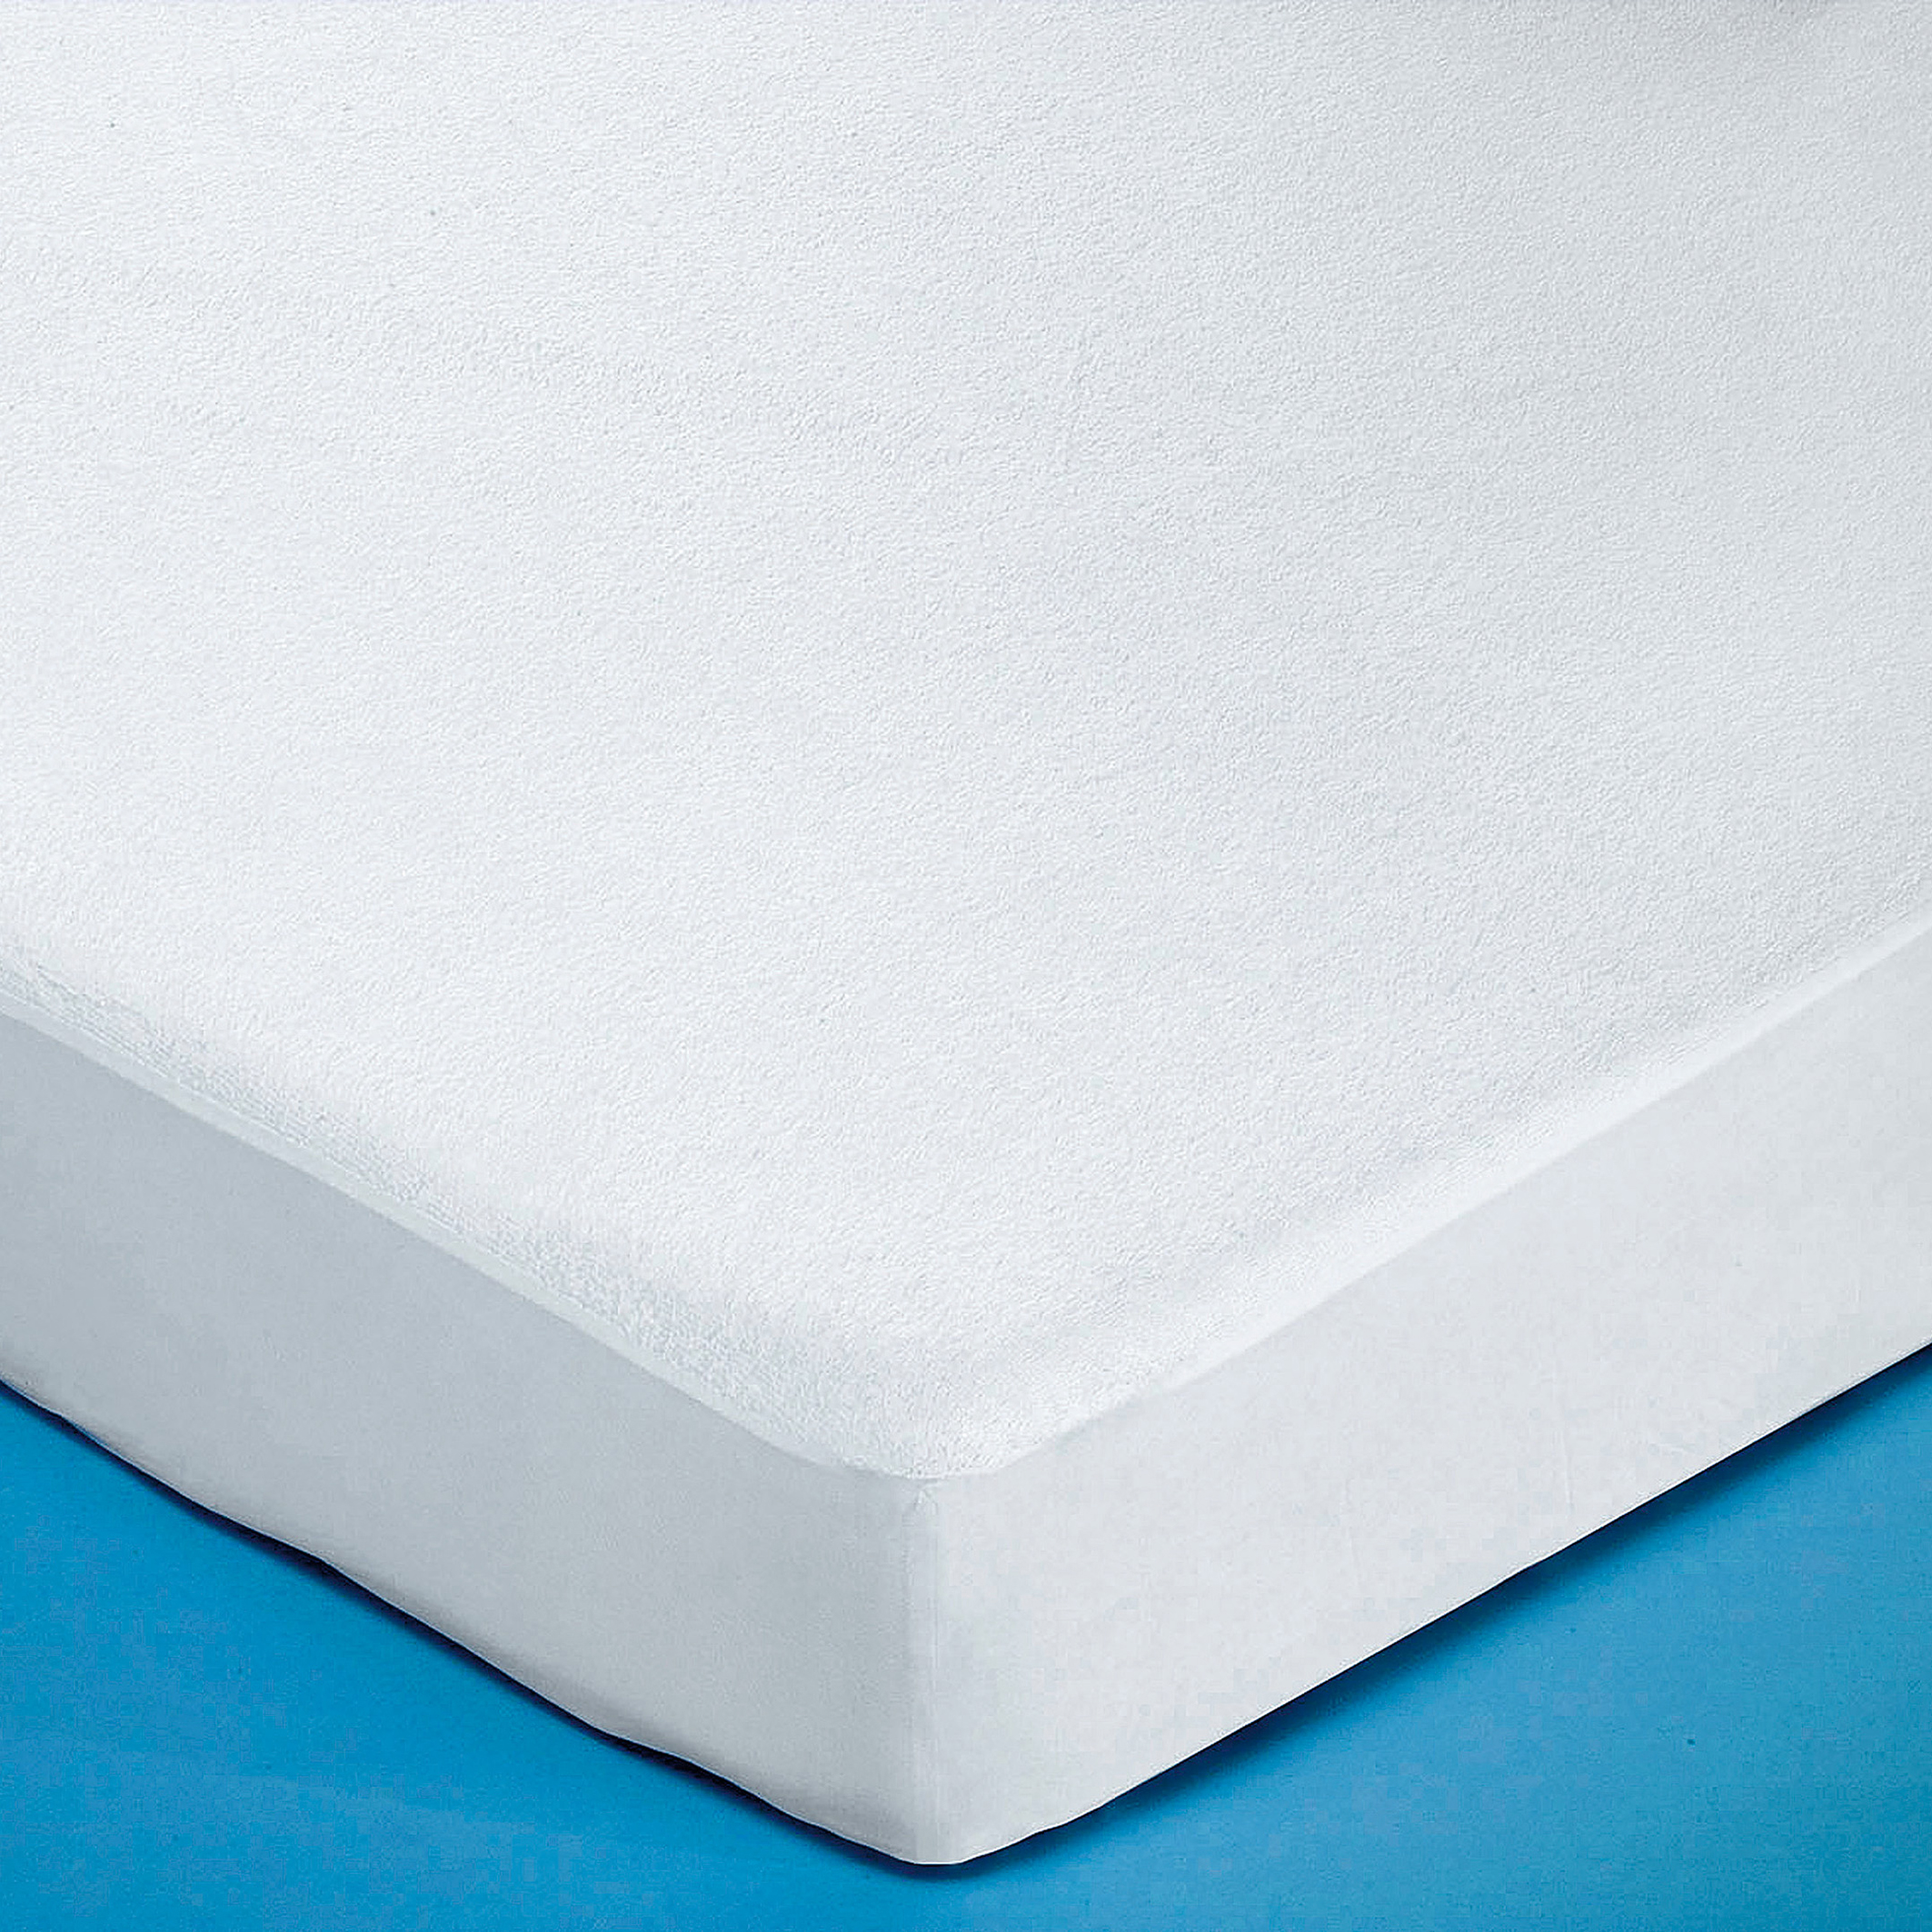 Cot Bed 140 x 70 cm Waterproof Mattress Protector Fitted Sheet Terry Towelling 